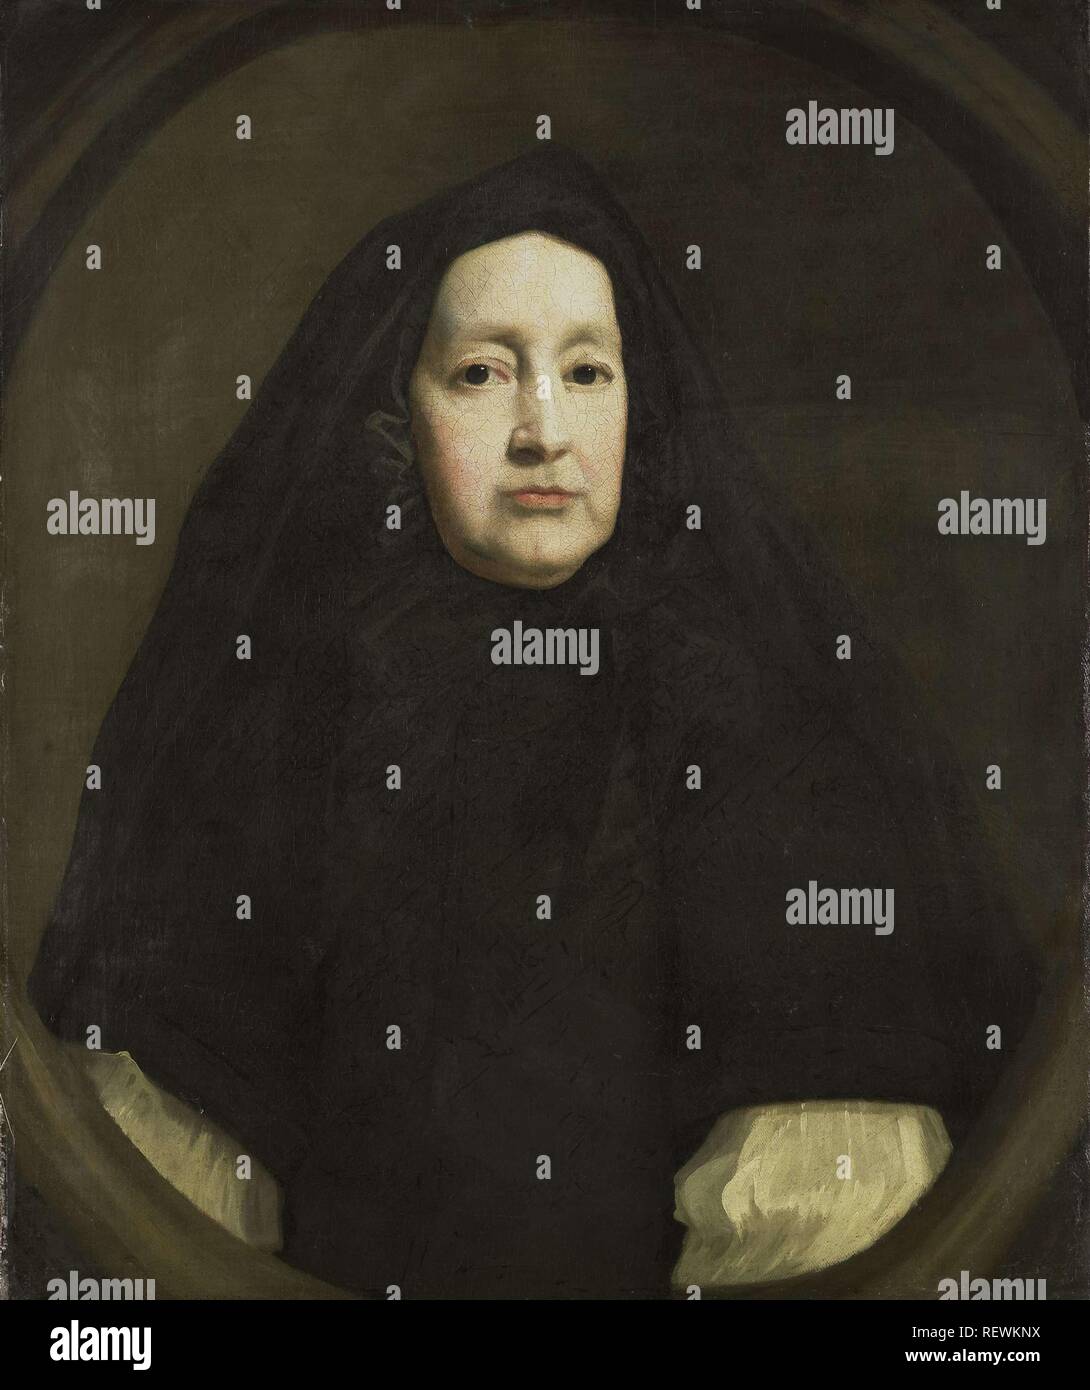 Portrait of Katharine Elliot (died 1688), Dresser of Duchess Anne of York and First Woman of the Bedchamber of Queen Mary of Modena, the first and second Wives of James II of England, respectively. Dating: c. 1680 - c. 1700. Measurements: h 76.3 cm × w 63.4 cm × t 2.9 cm; d 4.3 cm. Museum: Rijksmuseum, Amsterdam. Author: John Riley (copy after). Stock Photo